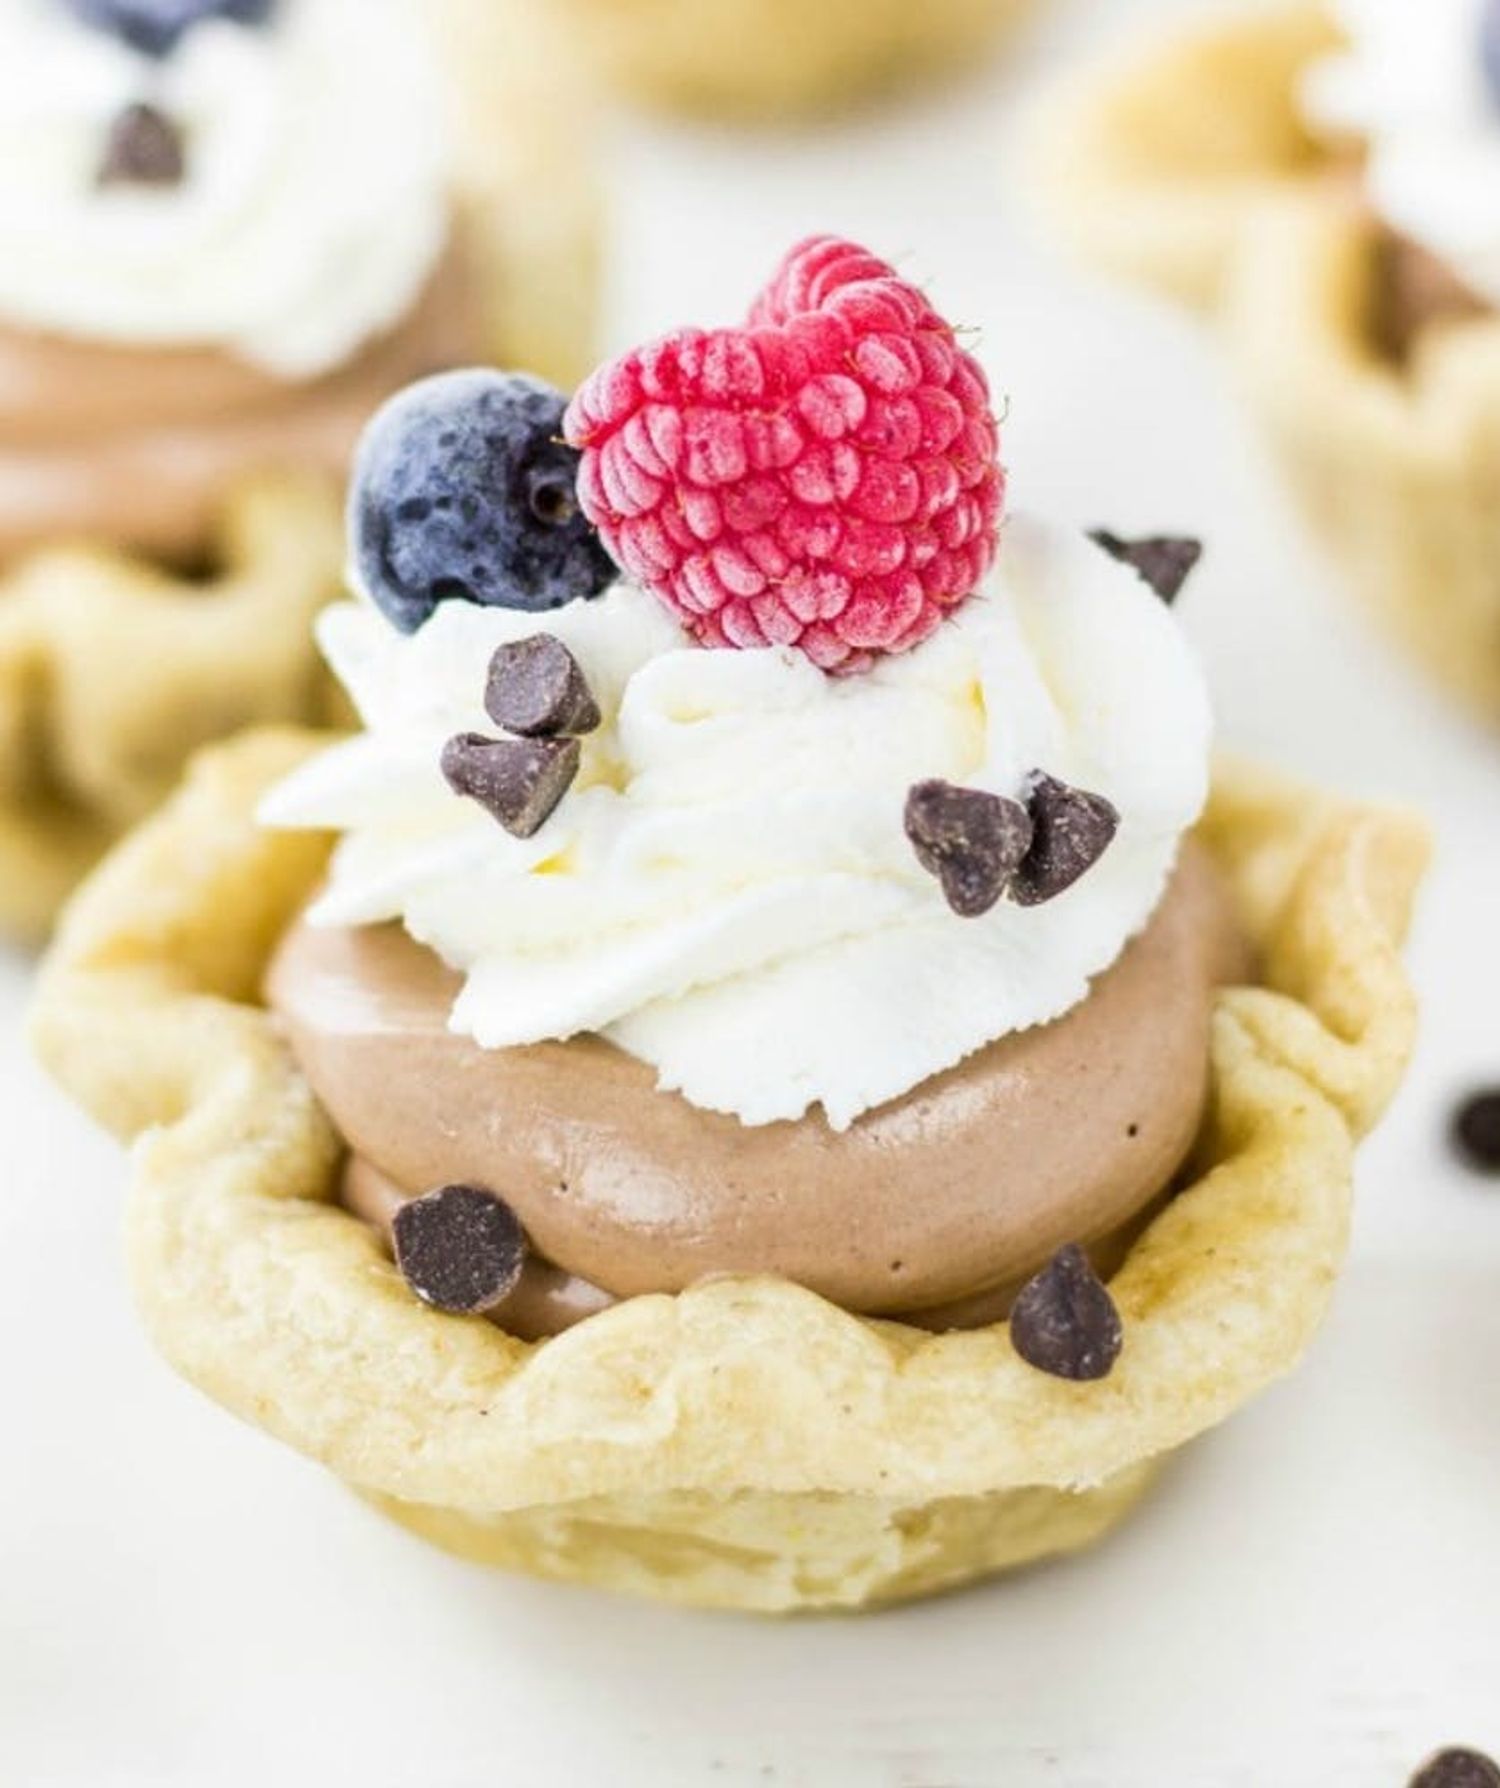 36 Easy Dessert Recipes to Make With Kids - Fun Baking Activities for Kids